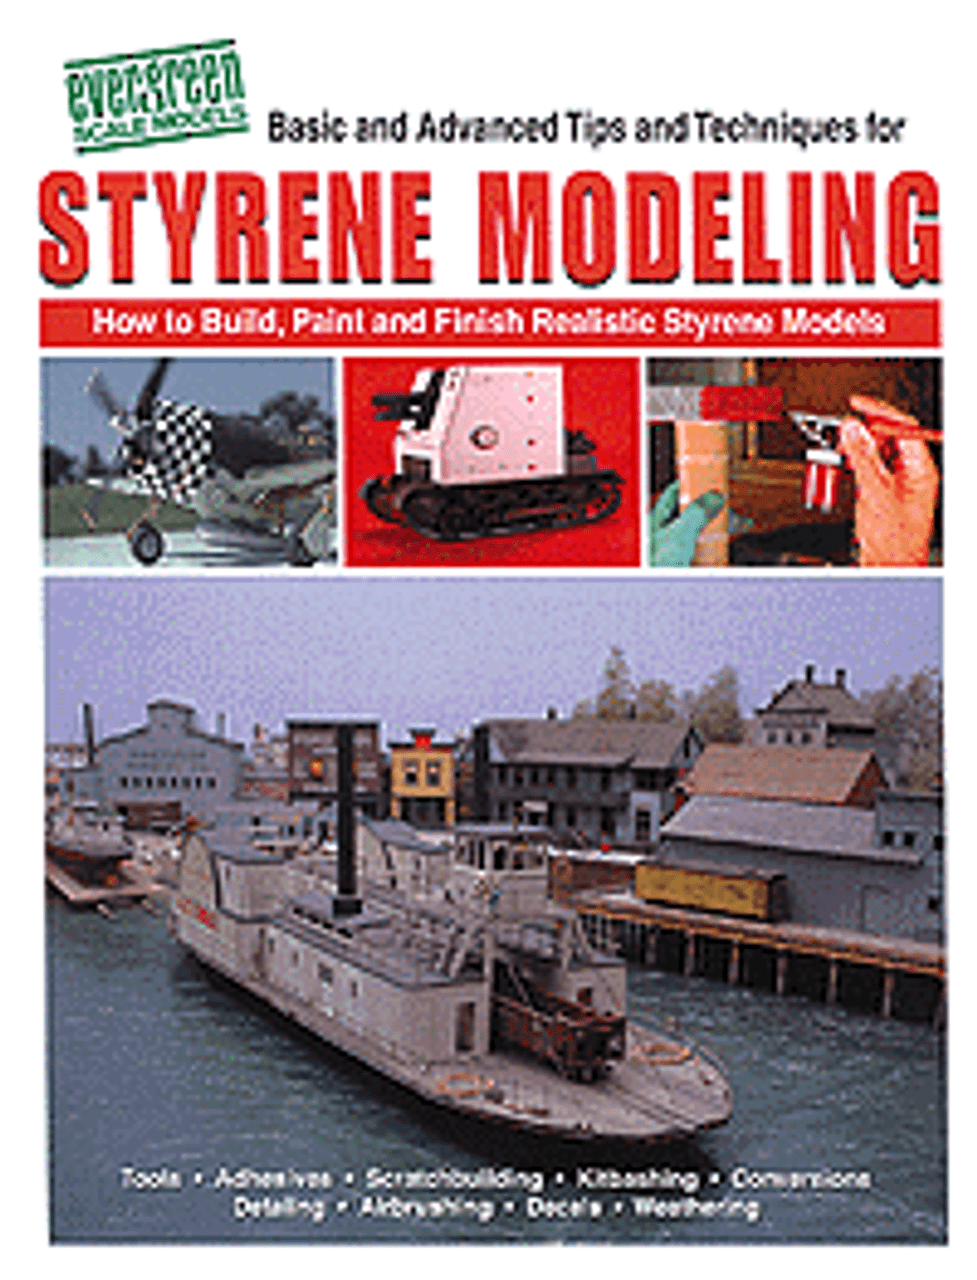 Book -- Styrene Modeling (88 Pages)